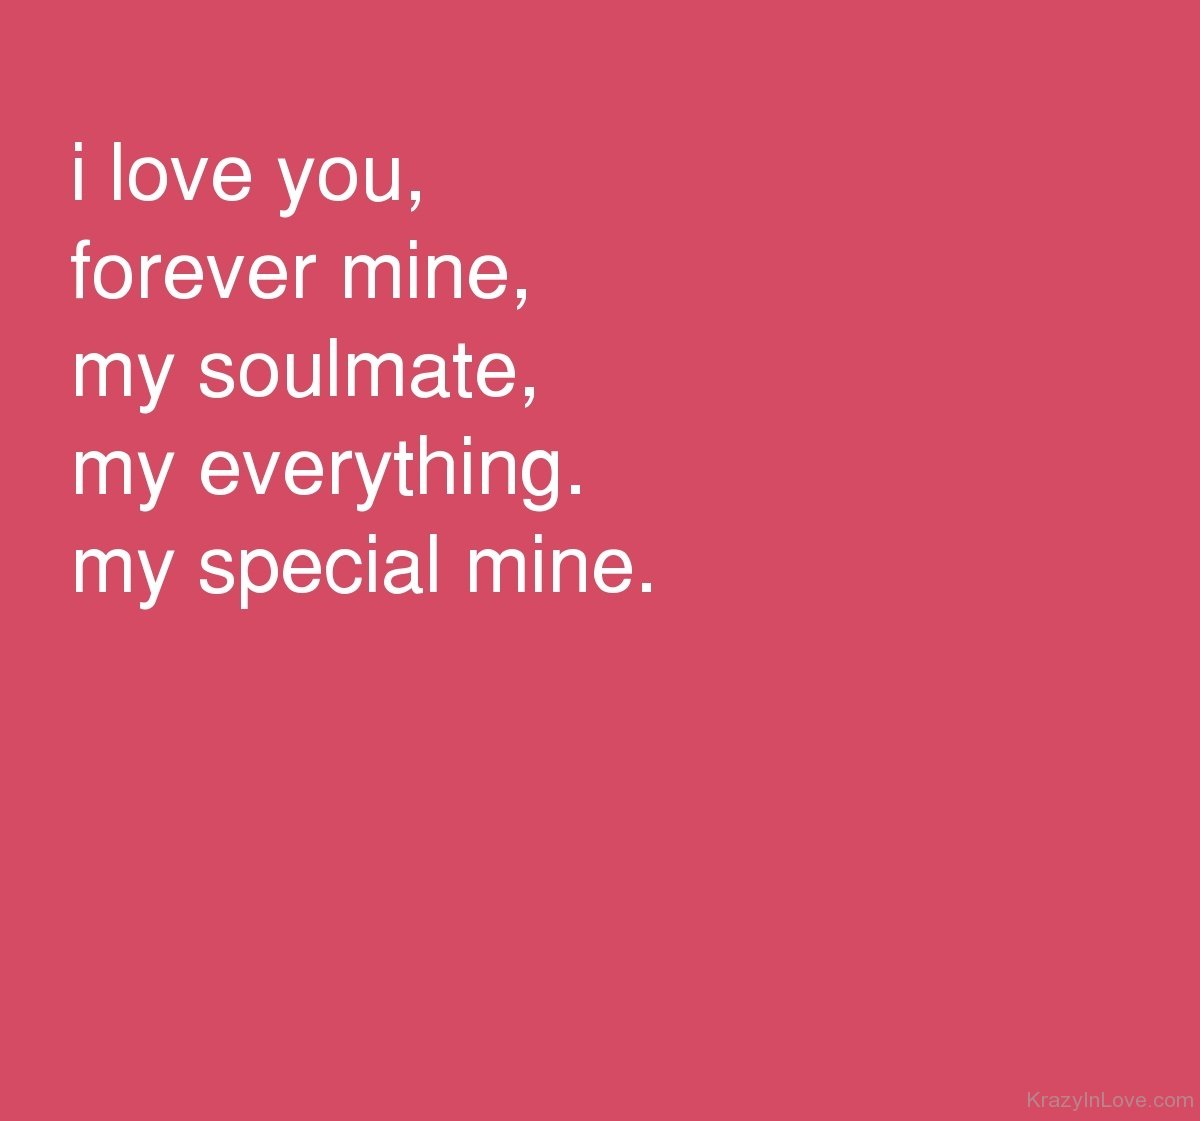 I Love You Forever Mine My Soulmate.